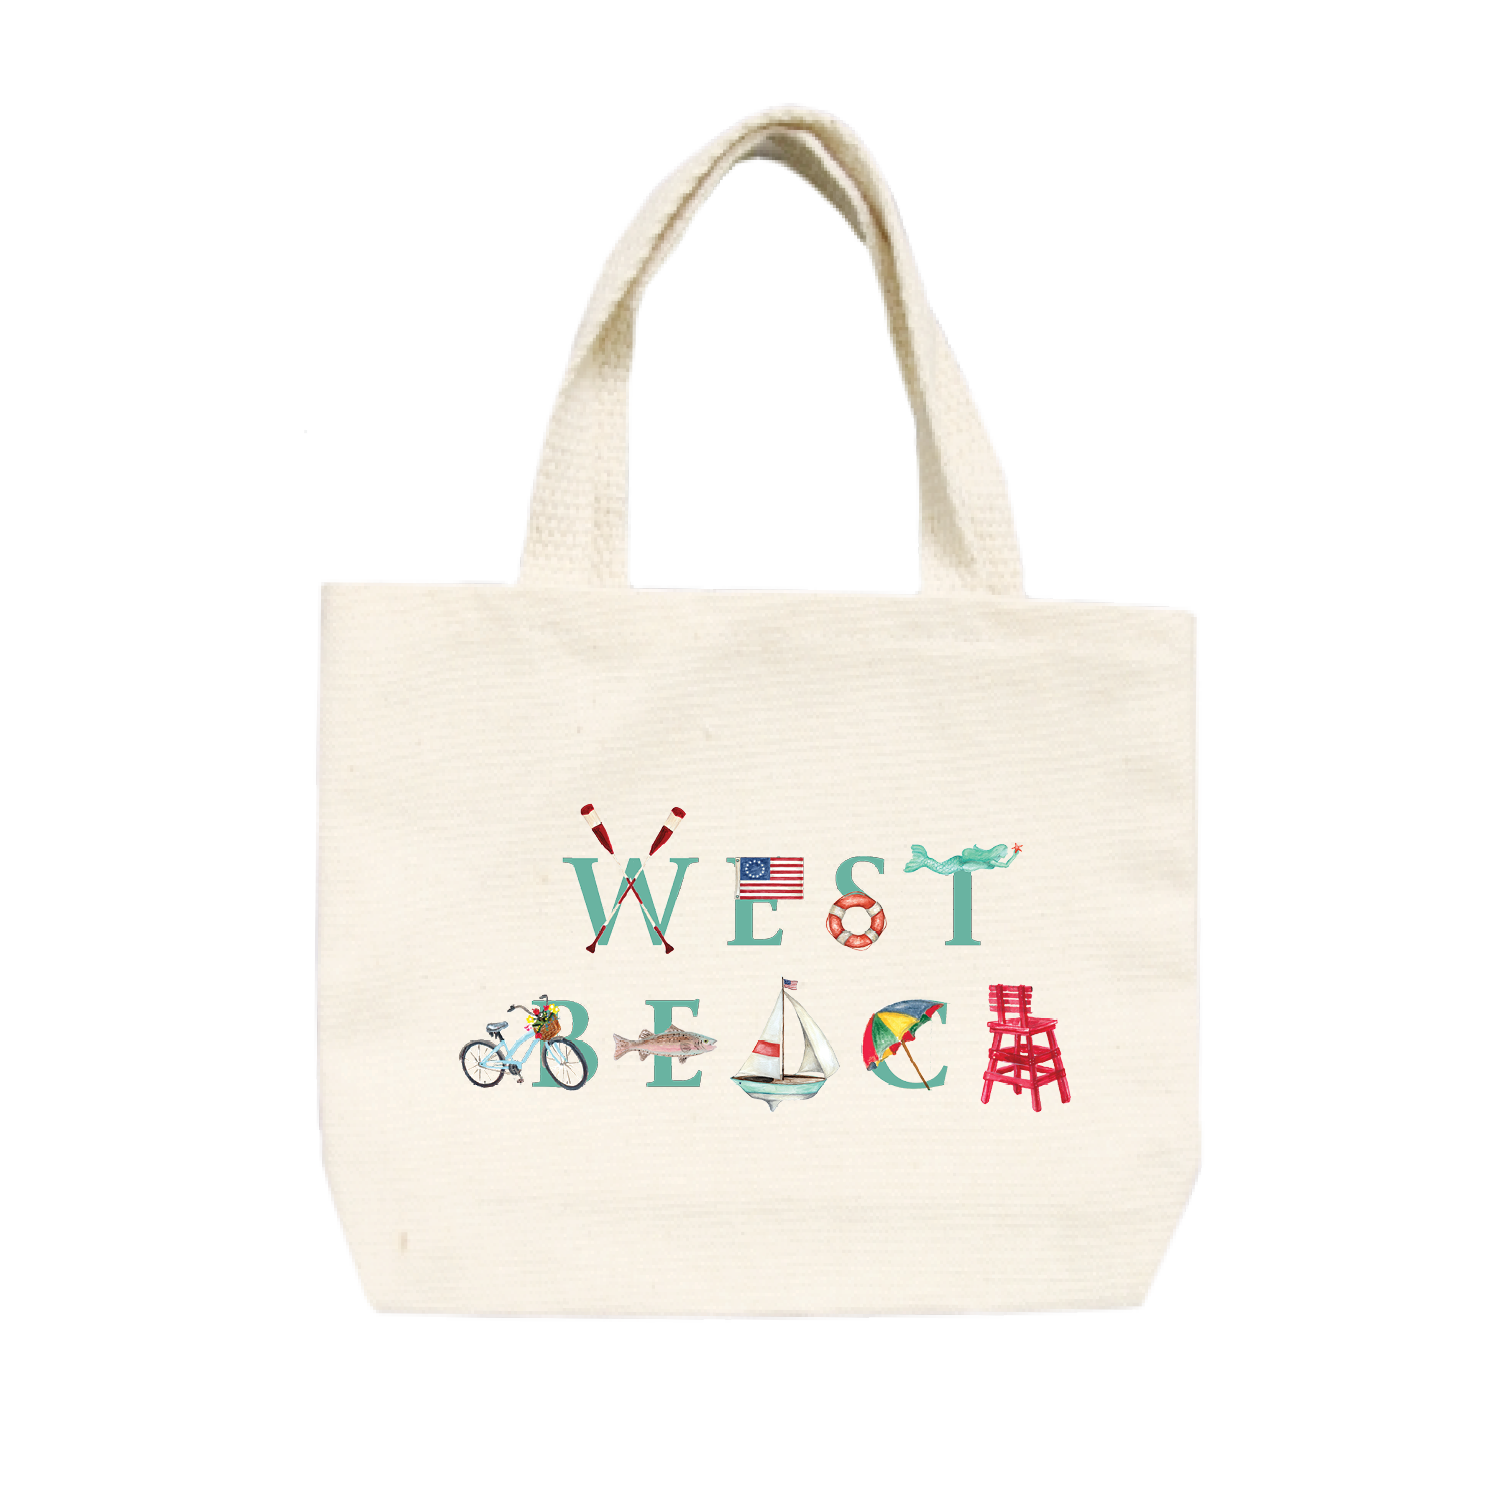 West Beach small tote